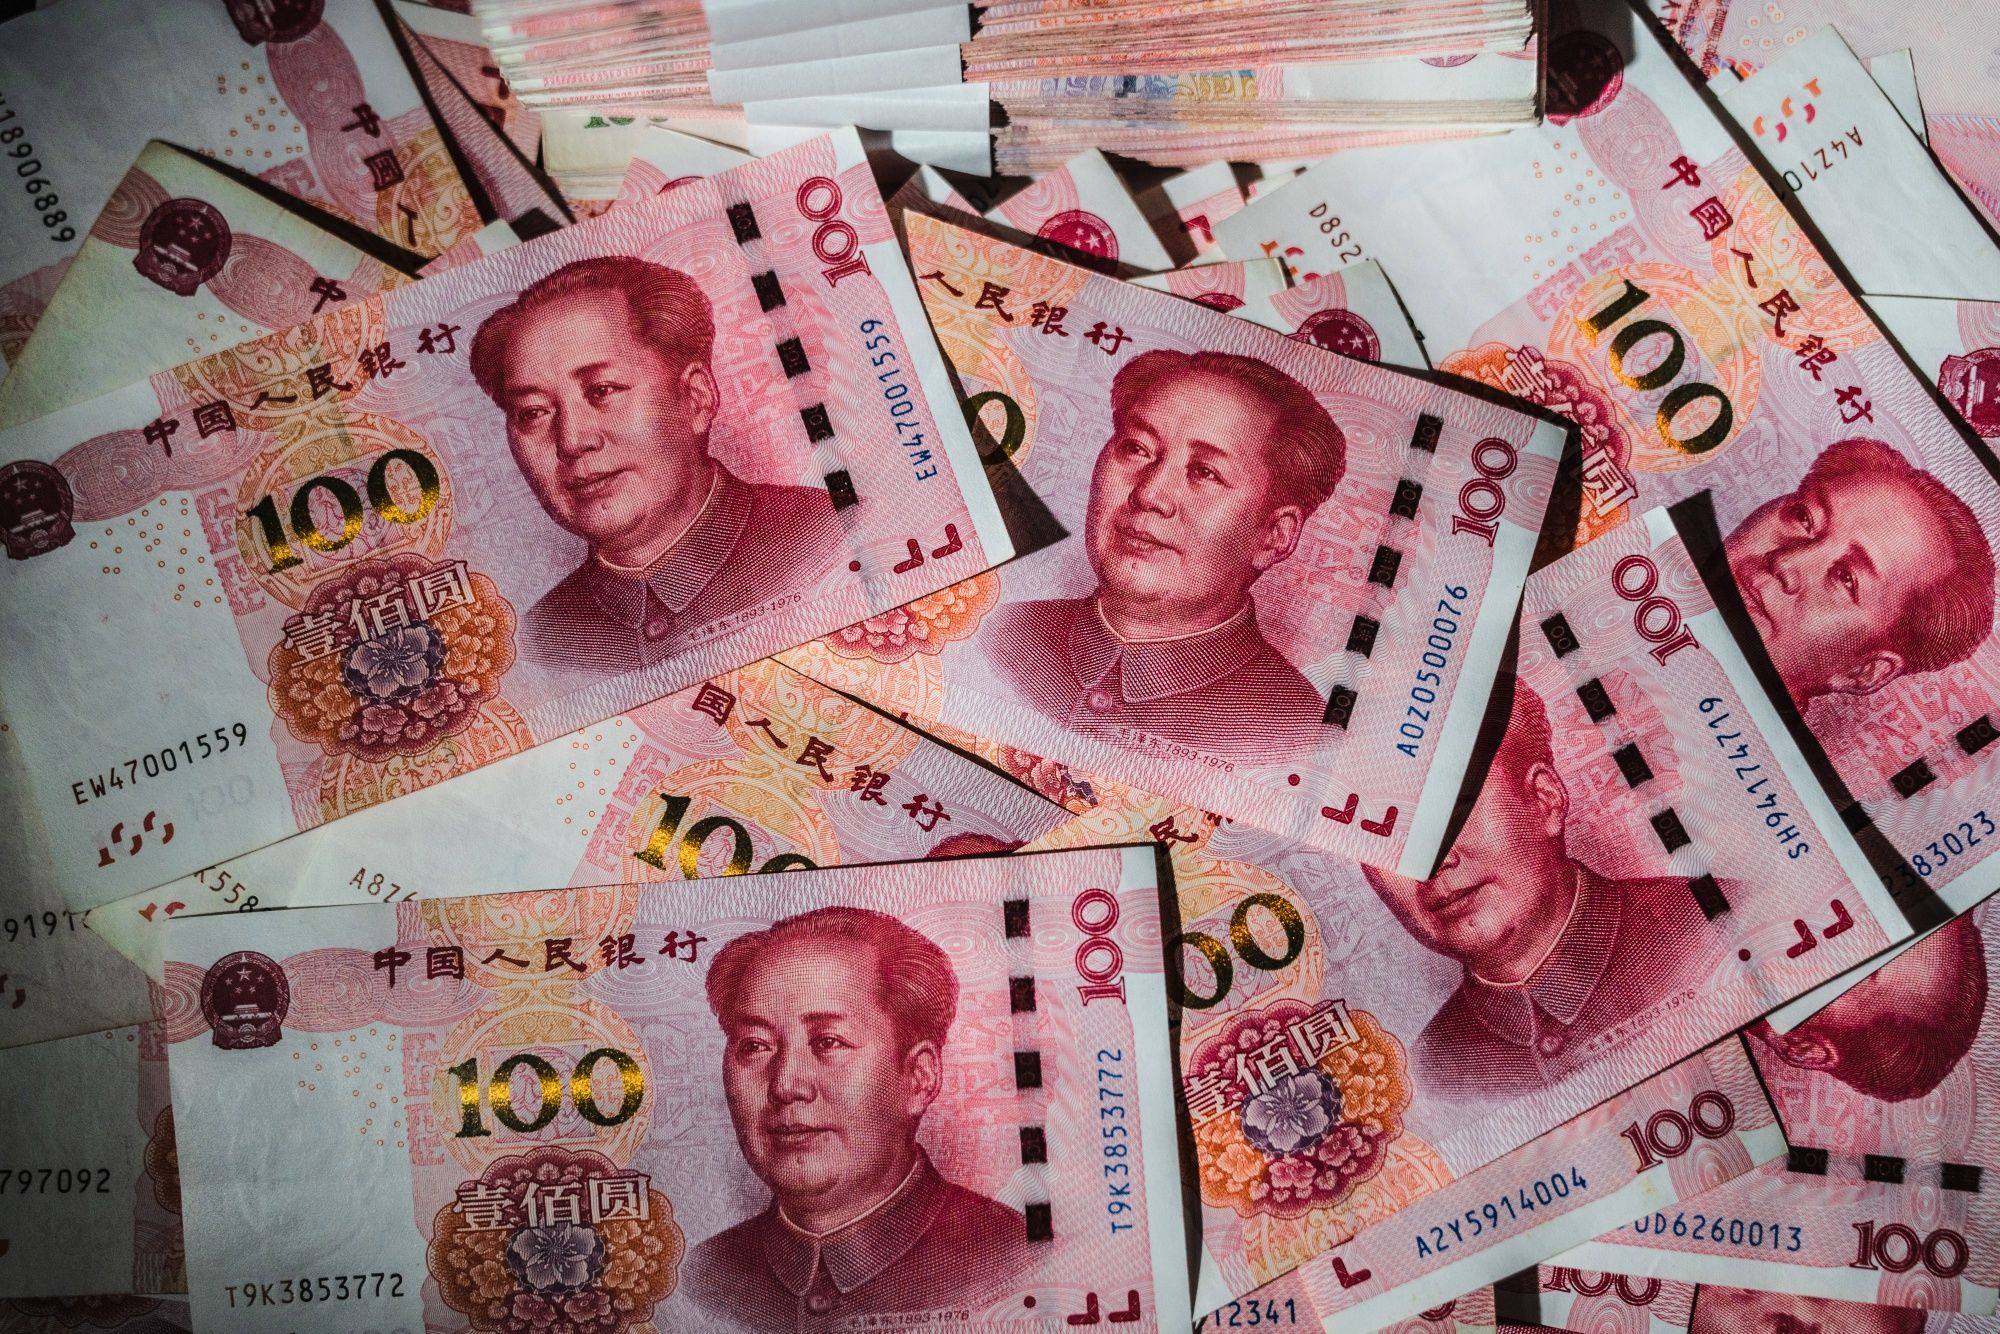 International fund managers are vying for China’s fast growing mutual-fund market, which has grown at a compound annual growth rate of about 20 per cent over the last five years, according to Fitch Ratings. Photo: Bloomberg